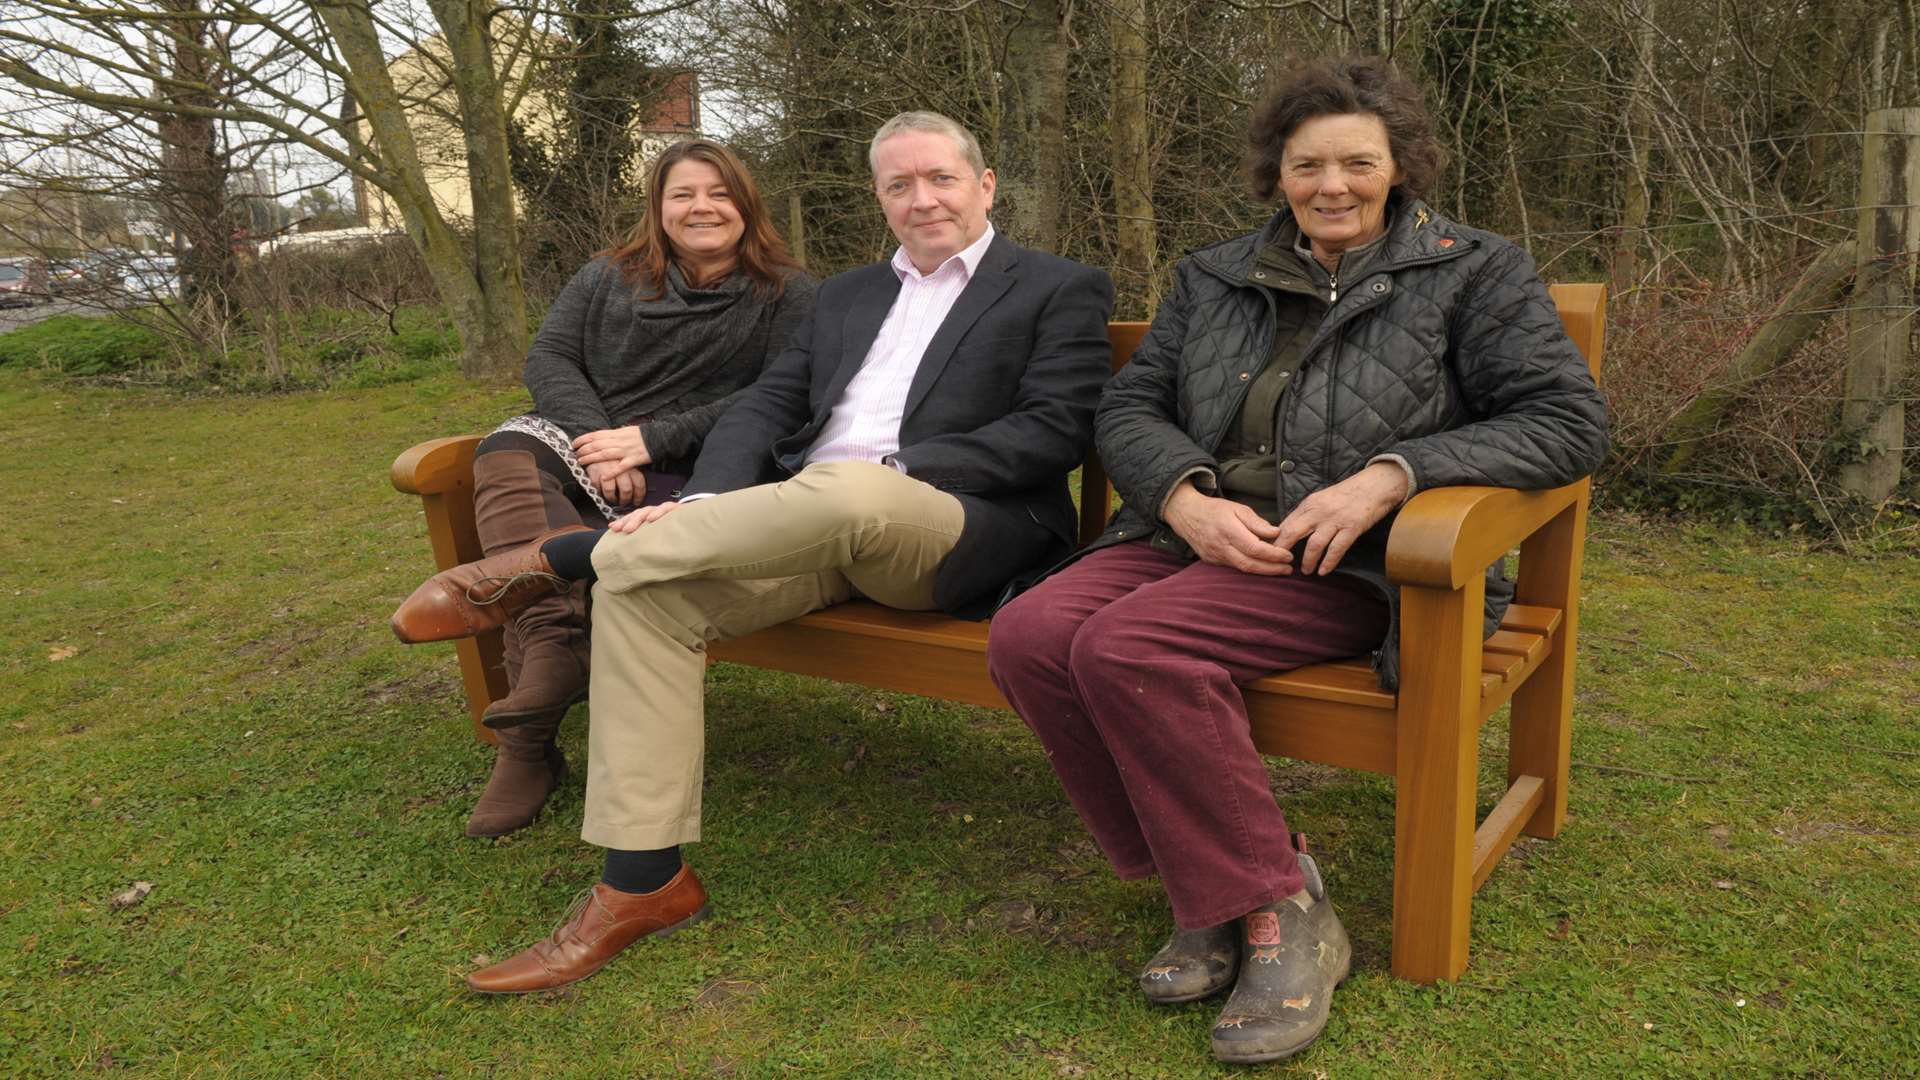 Sheppey Big Local members Sarah Williams, Andy Booth and Kathleen Carter on one of the benches at Rowetts Way roundabout, Eastchurch